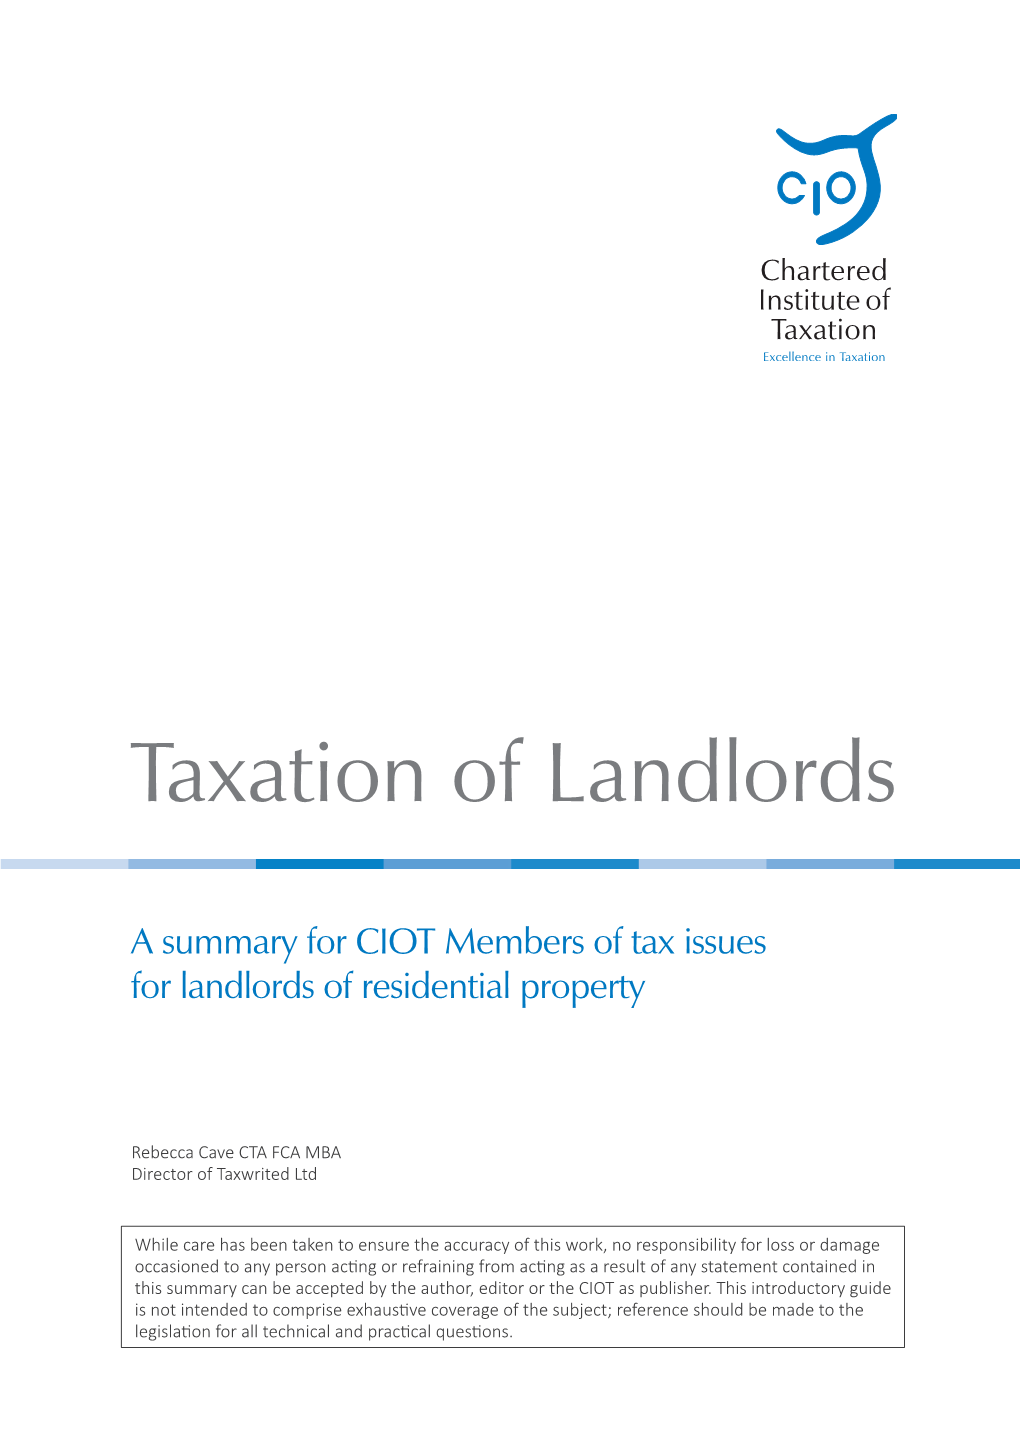 Taxation of Landlords: a Summary for CIOT Members of Tax Issues For